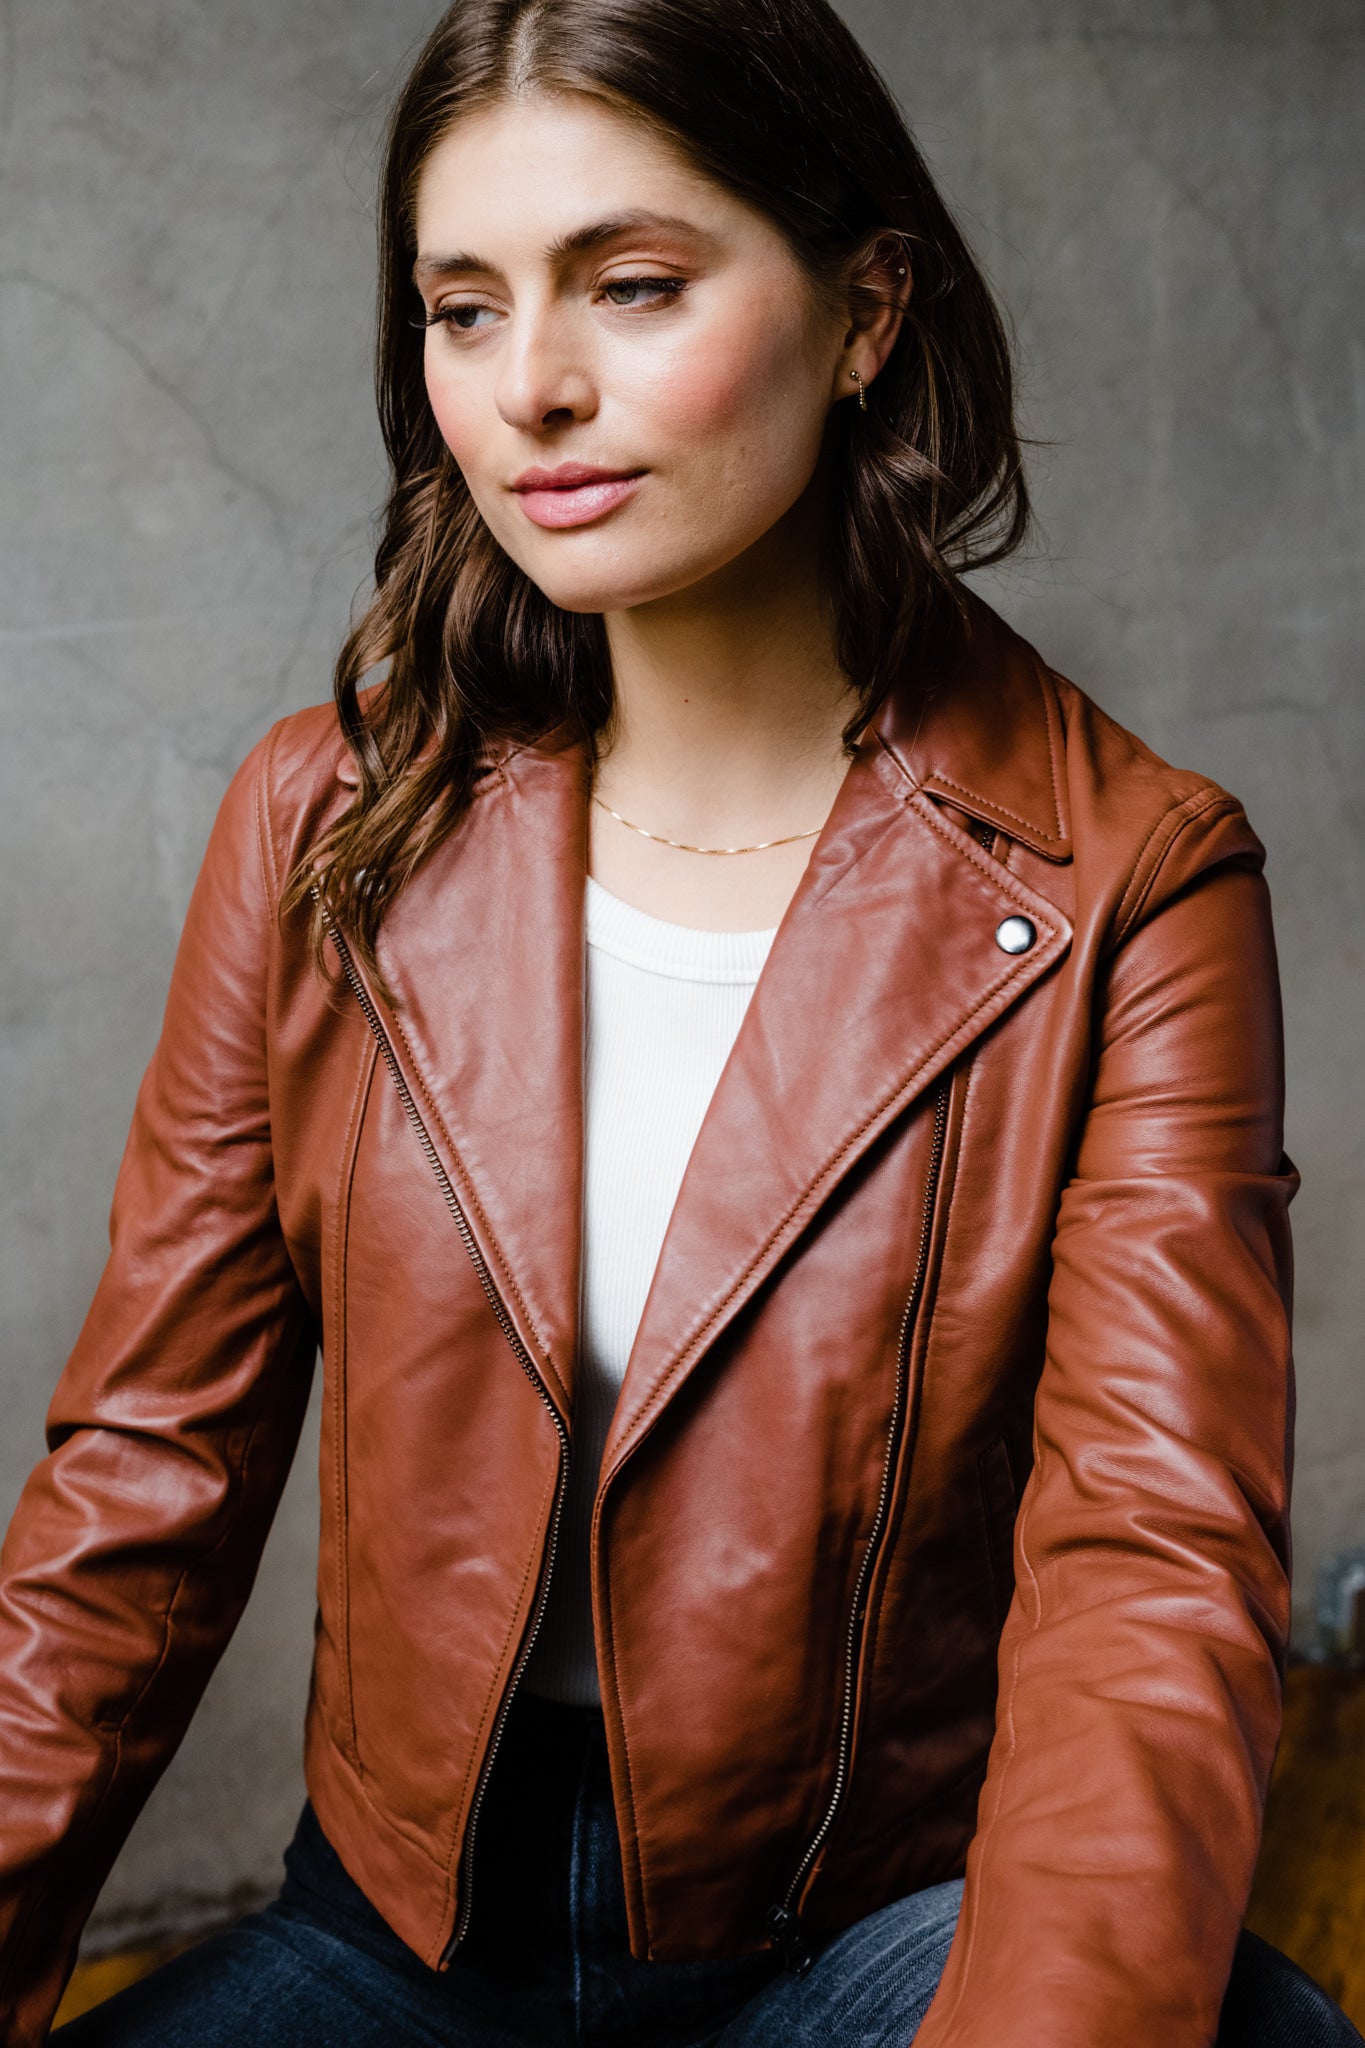 Woman in brown leather jacket looking to the side.